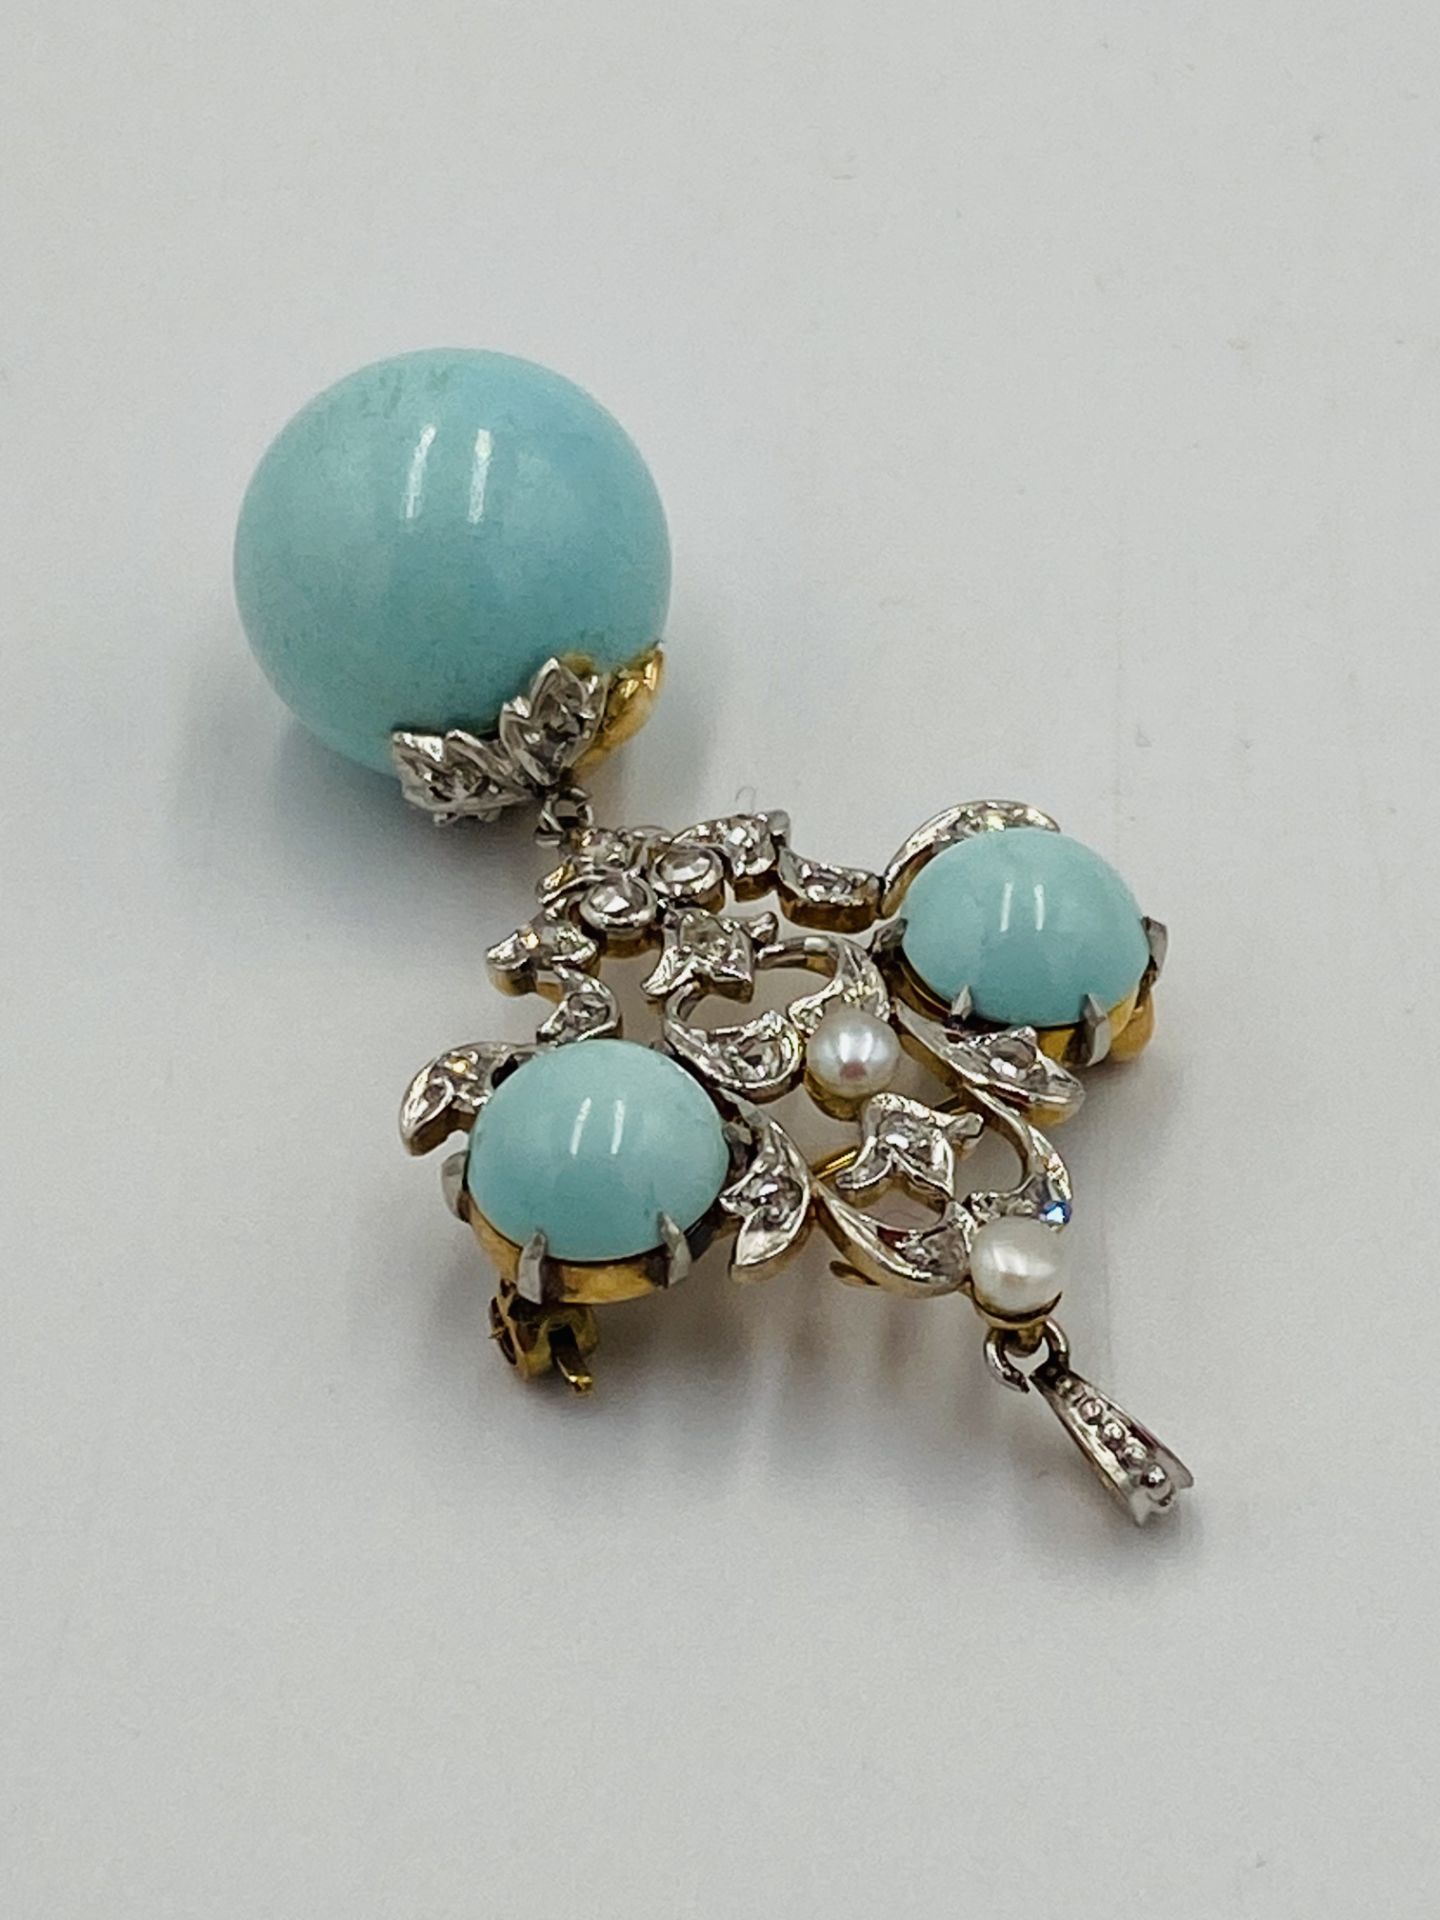 Turquoise and diamond brooch/pendant - Image 2 of 5